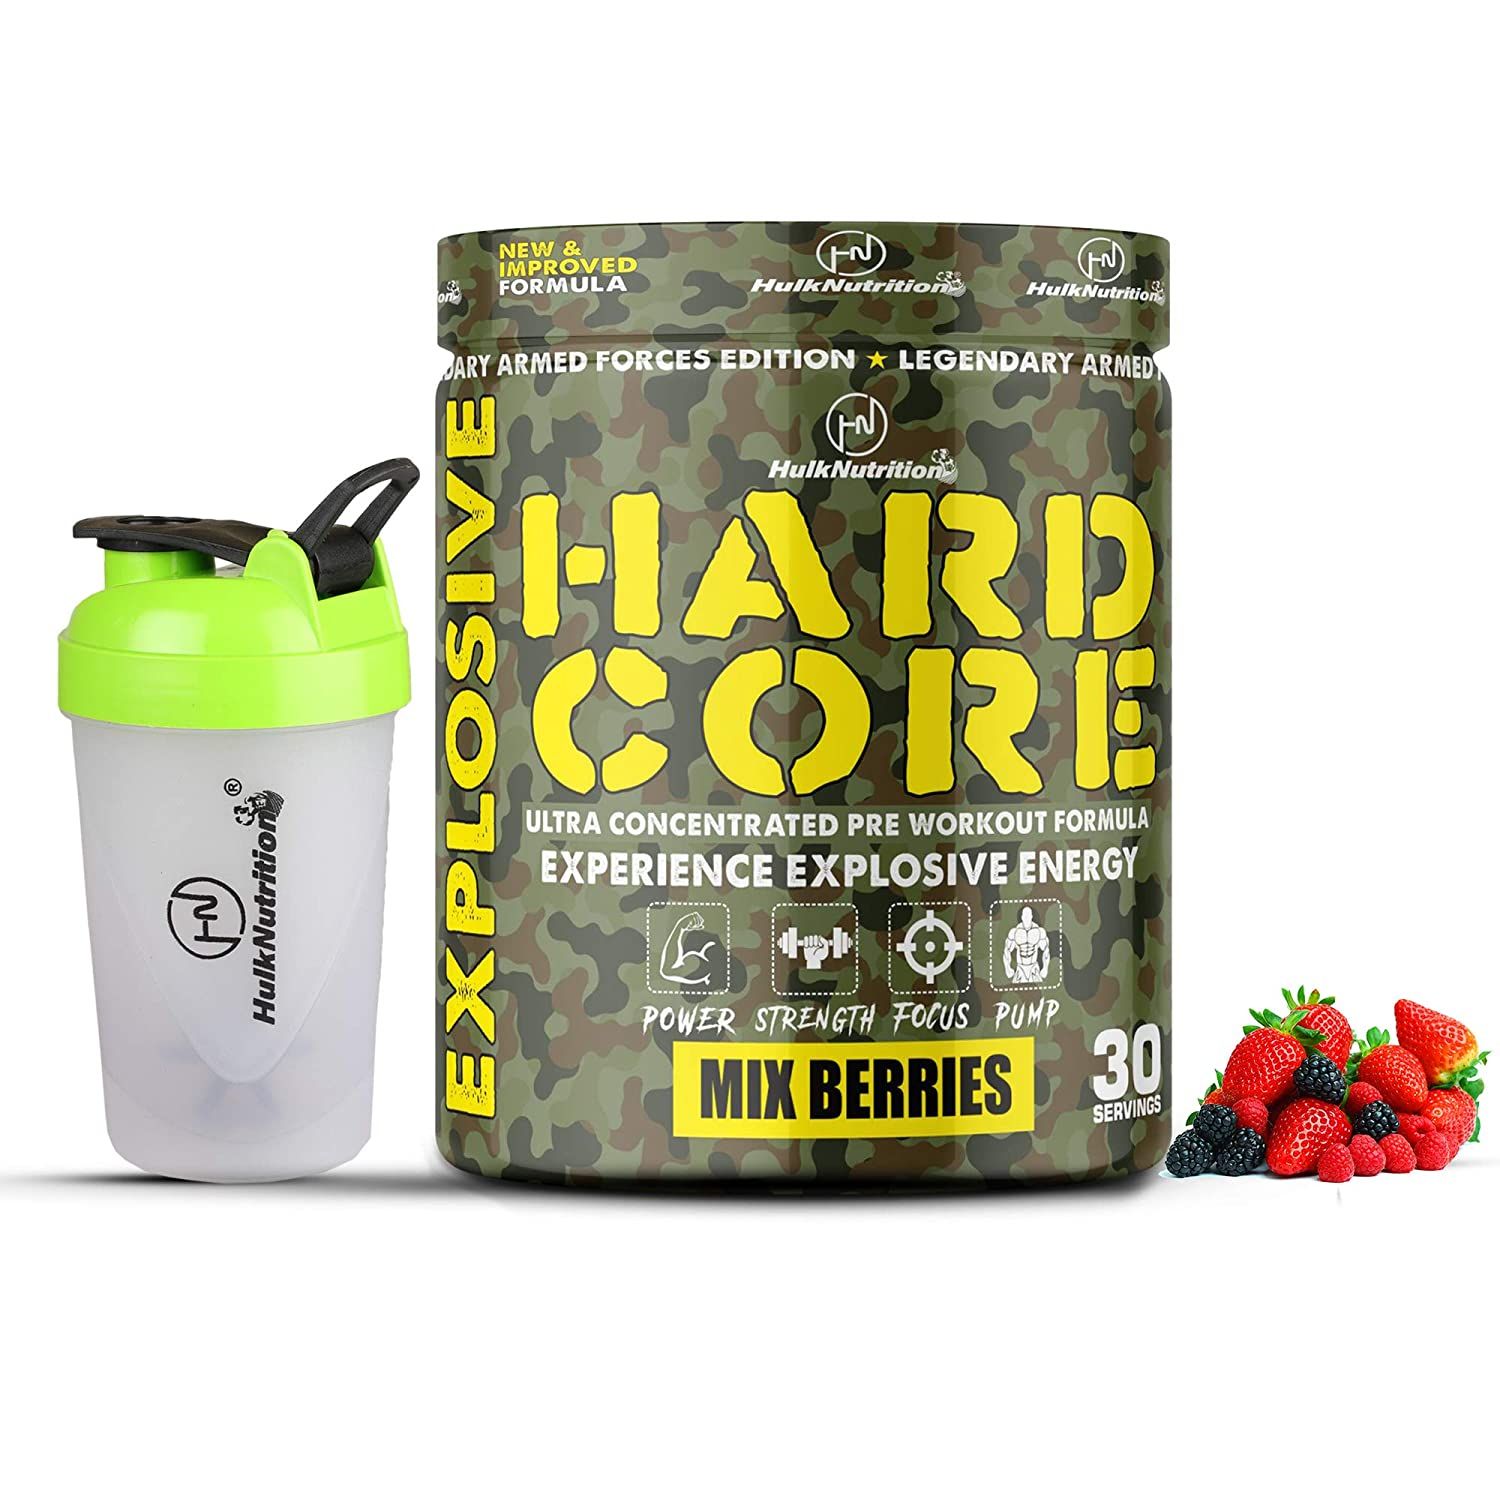 Hulk Nutrition Hardcore Pre Workout Supplement Energy Drink Mix Berries Image